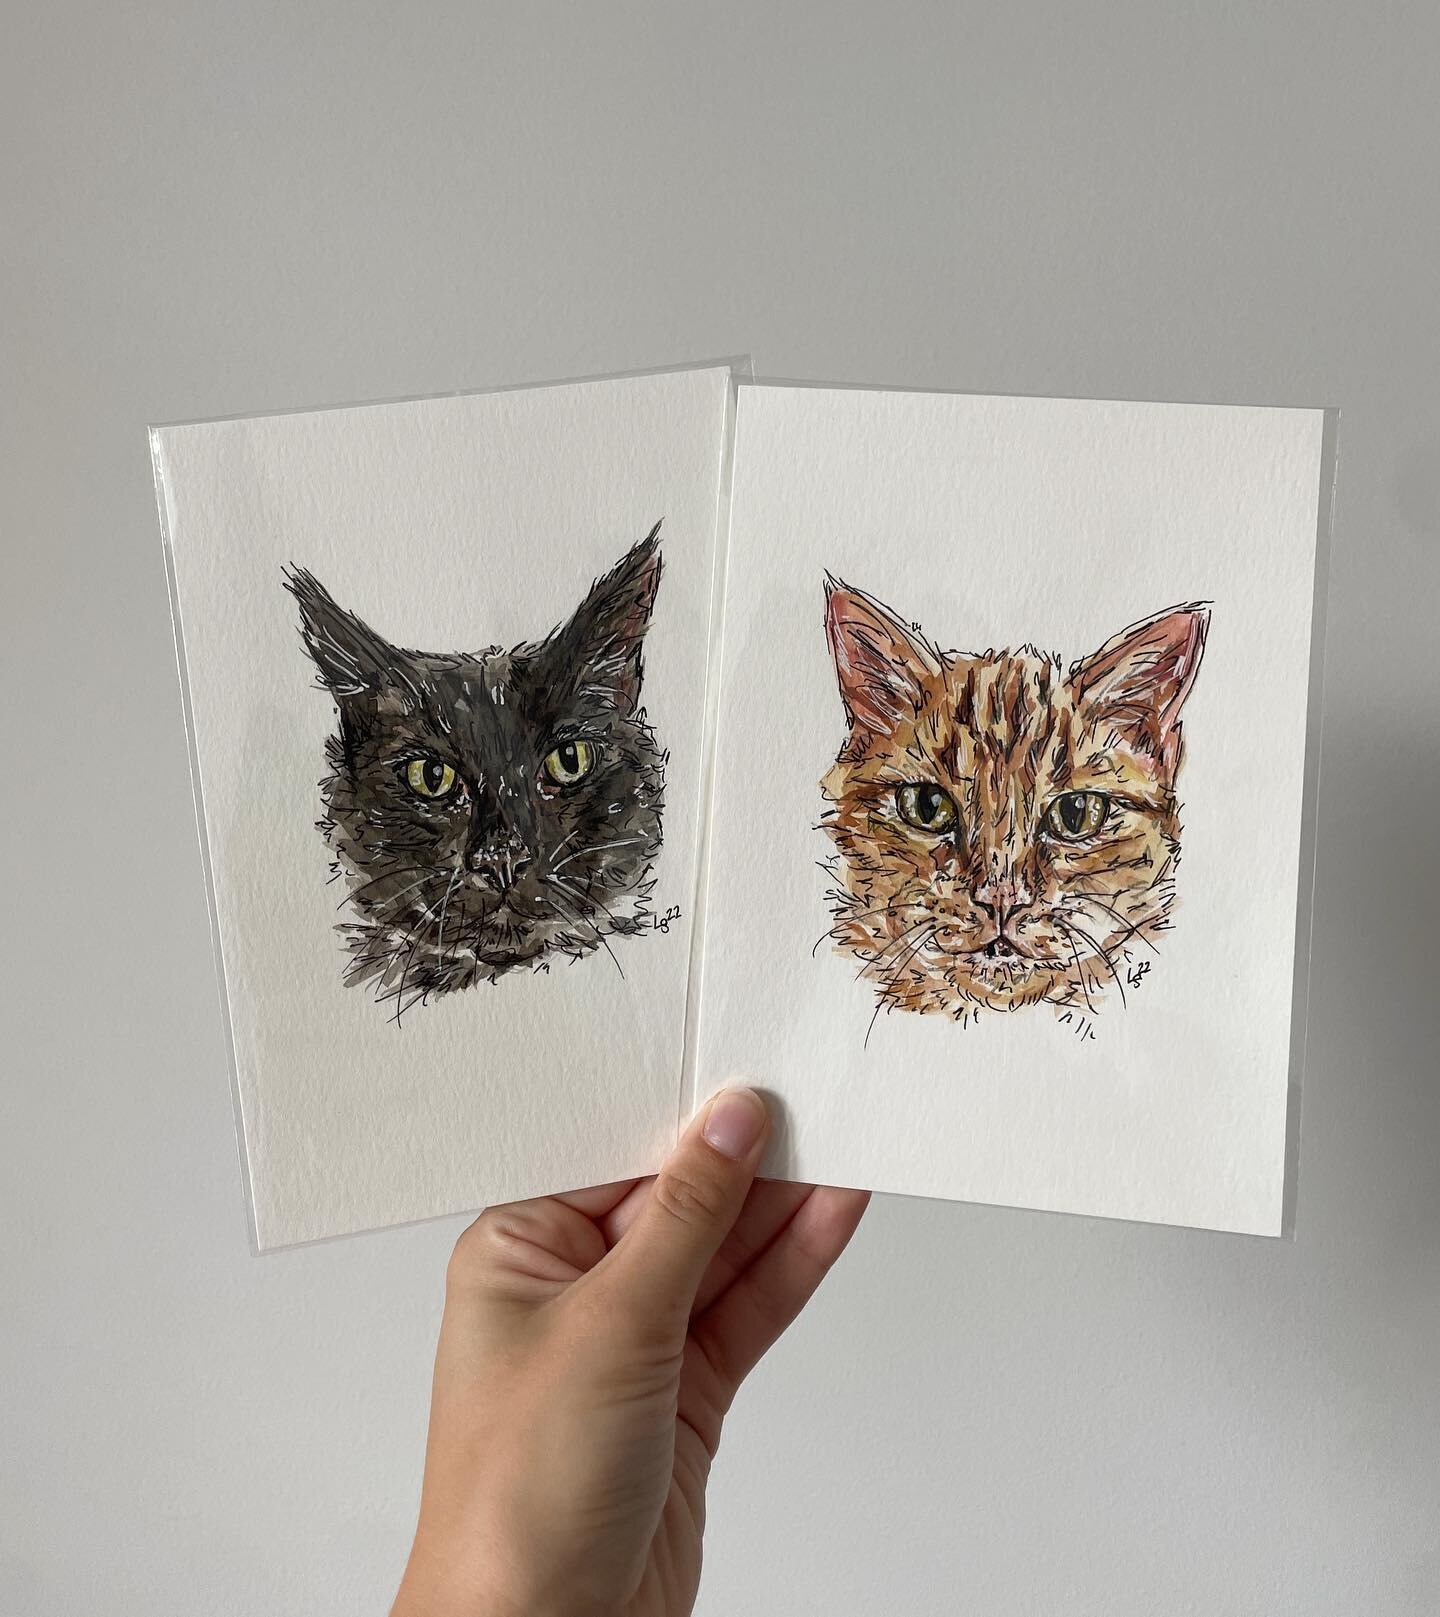 Couple of sweet kitties 🐈&zwj;⬛ 

5 x 7 watercolor + pen

I&rsquo;ve been busy balancing pet portraits and working full time but it has been a joy! Finishing up some more portraits this week and adding some to the list! Already thinking ahead to the